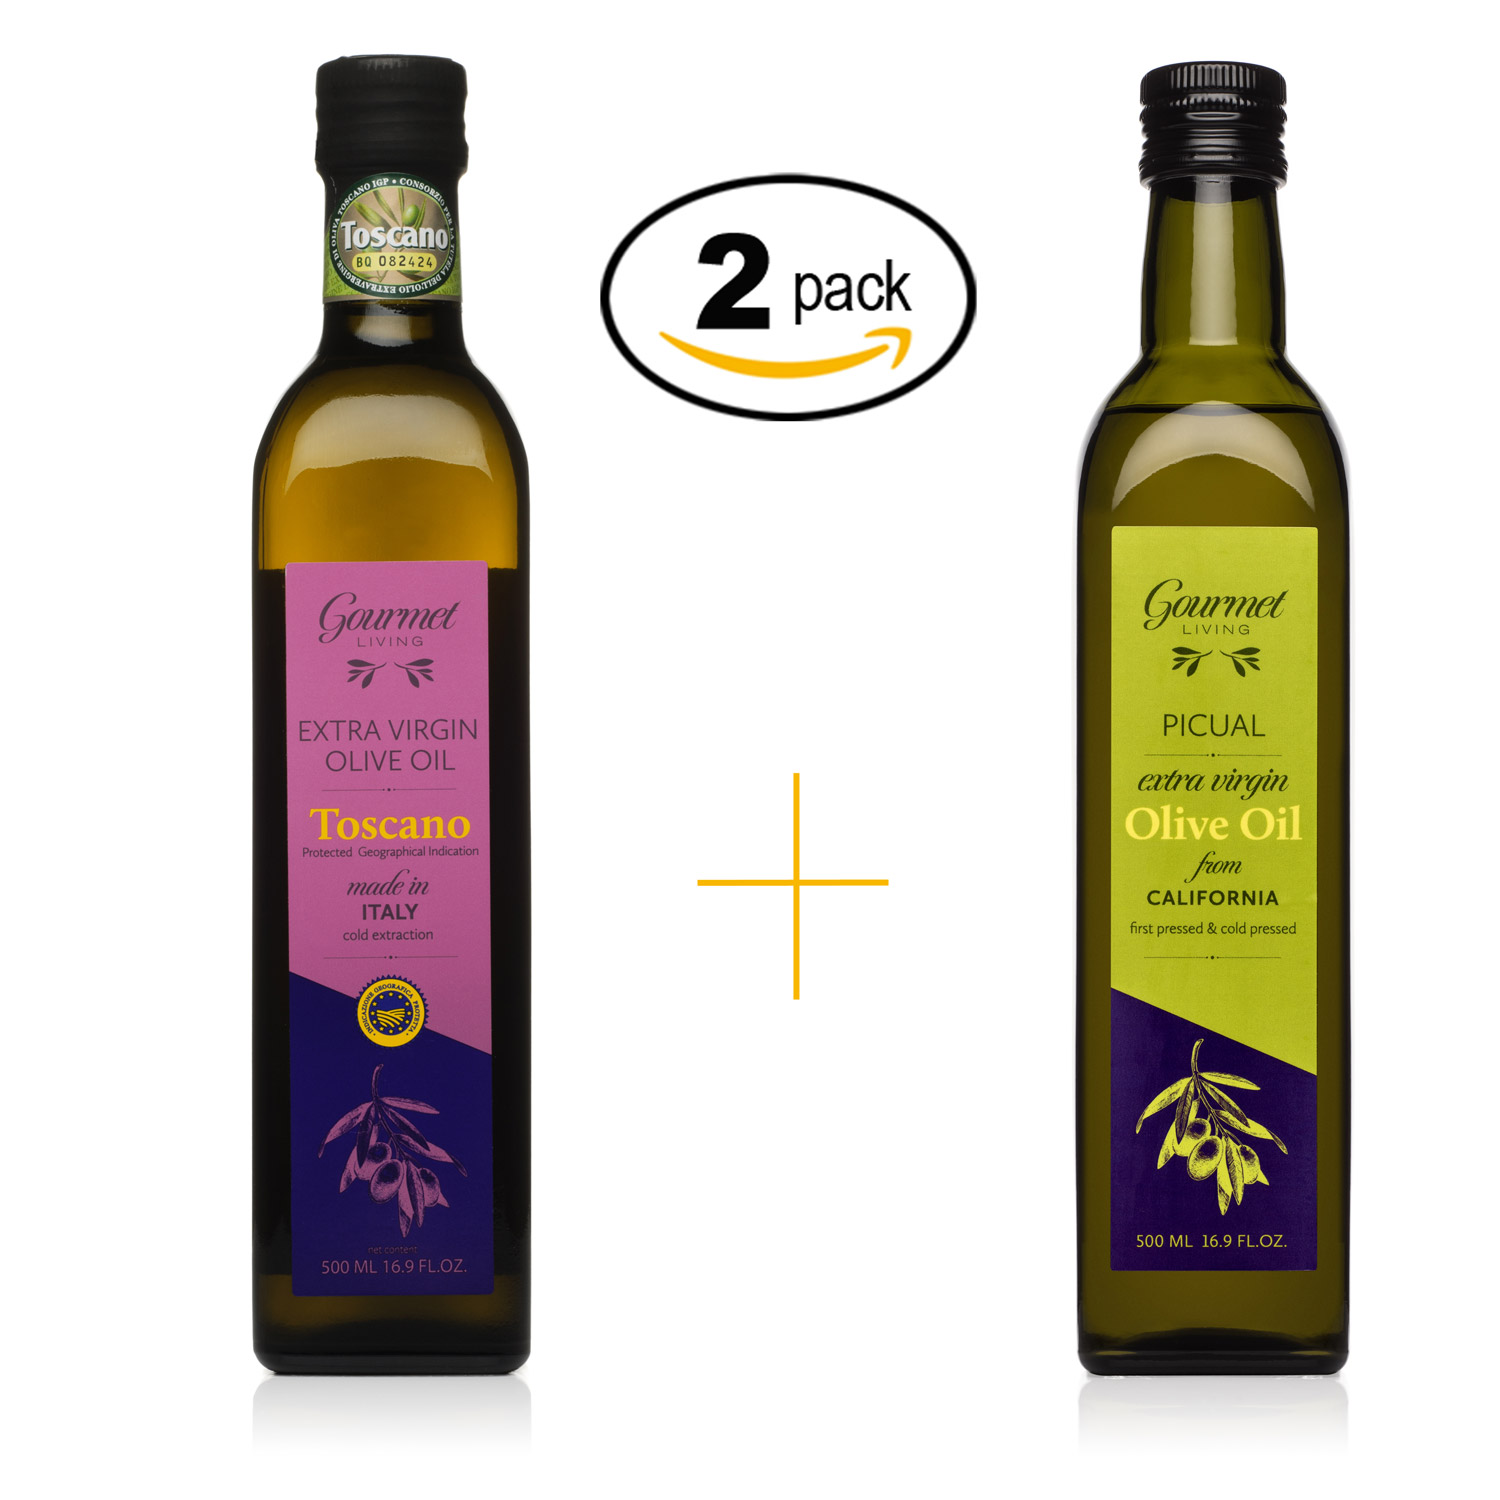 Gift Set of Extra Virgin Olive Oil from Italy and California